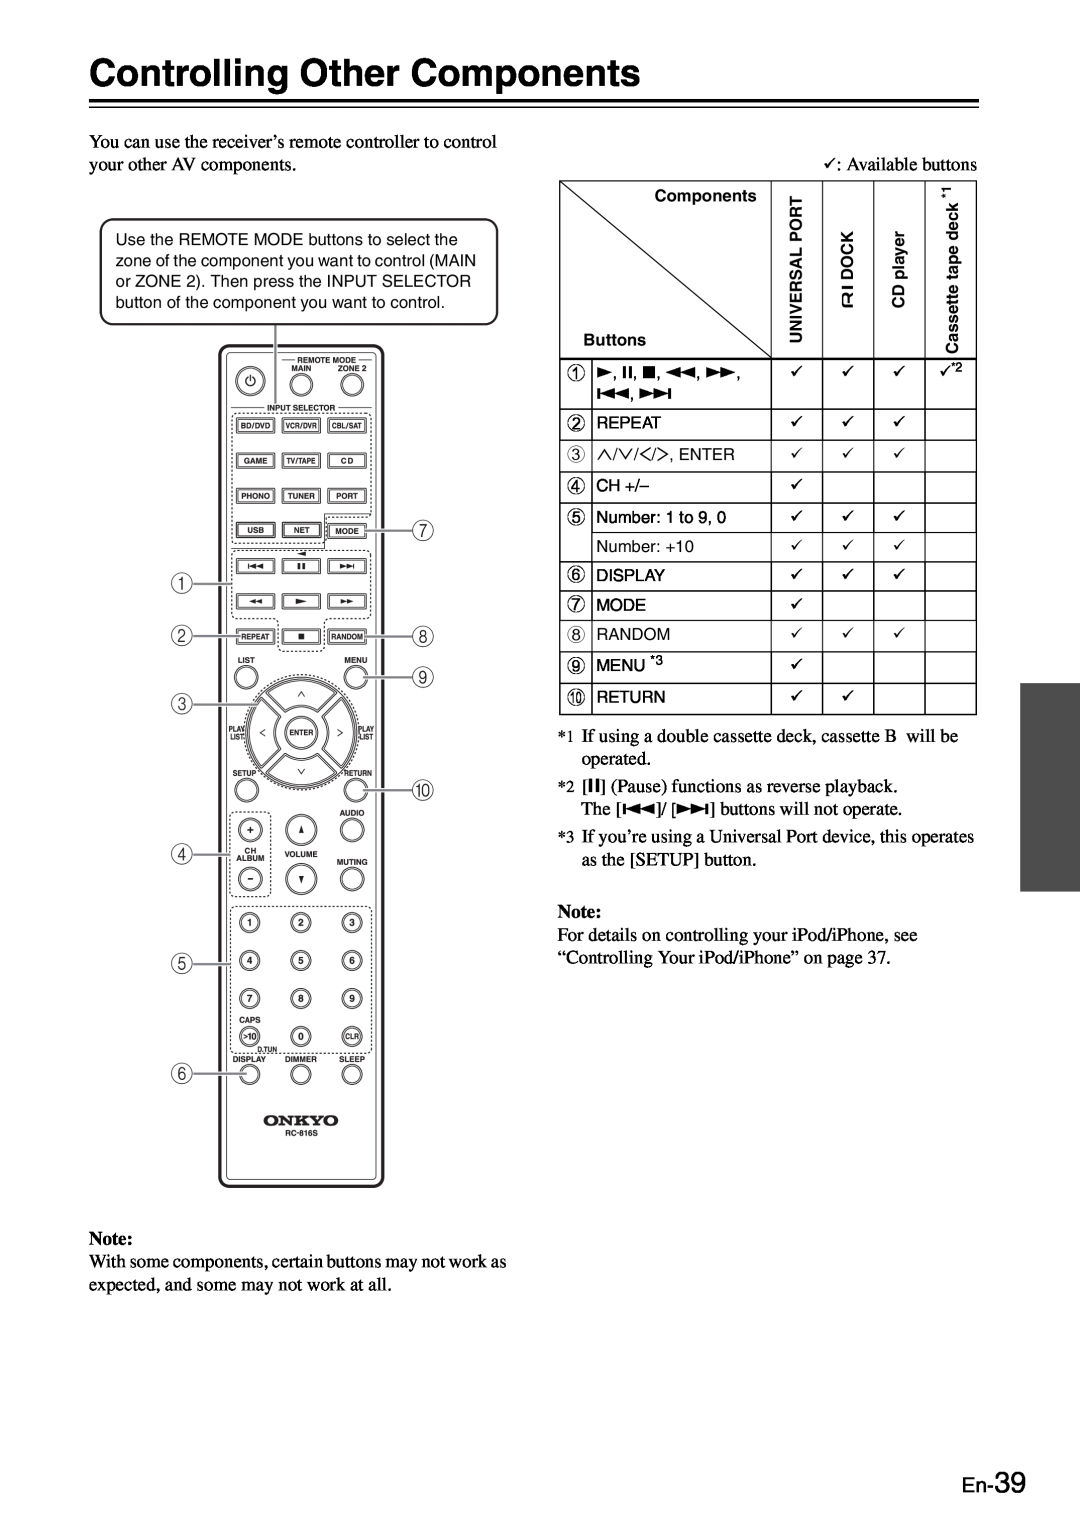 Onkyo TX-8050 instruction manual Controlling Other Components, 7 1 28 9 3 4 5, En-39 